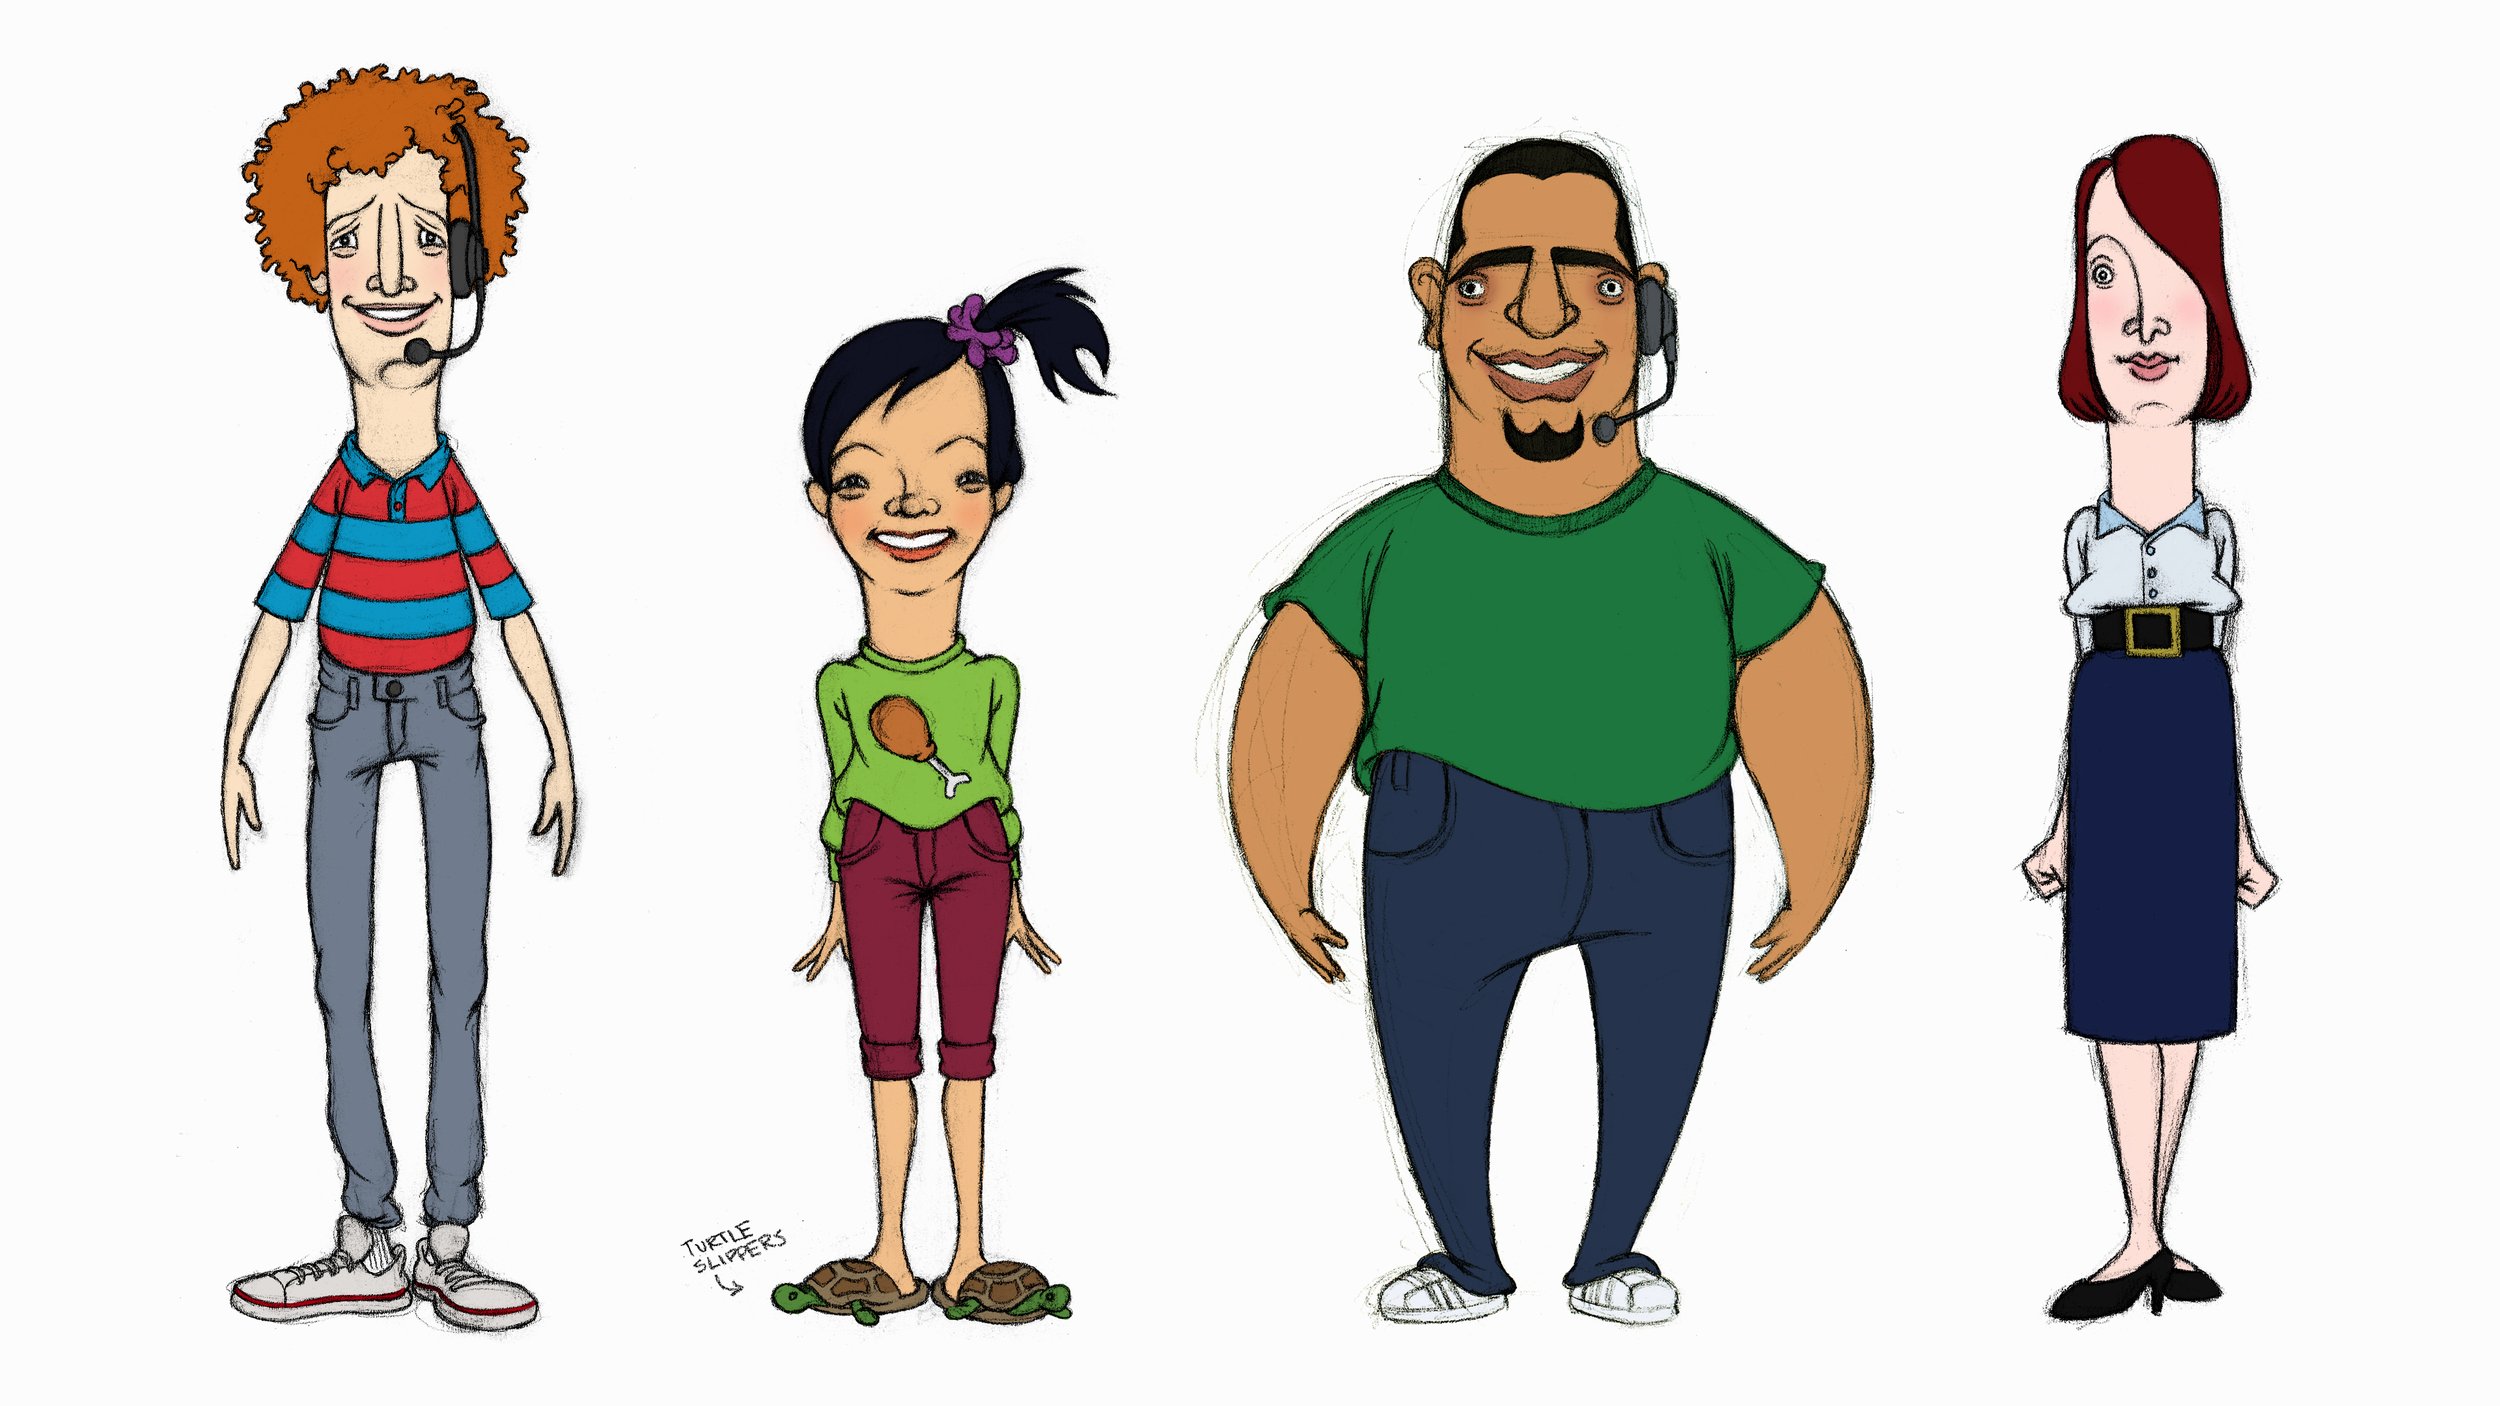 Zappos_CharacterLineup_SquareSpace_092815.jpg